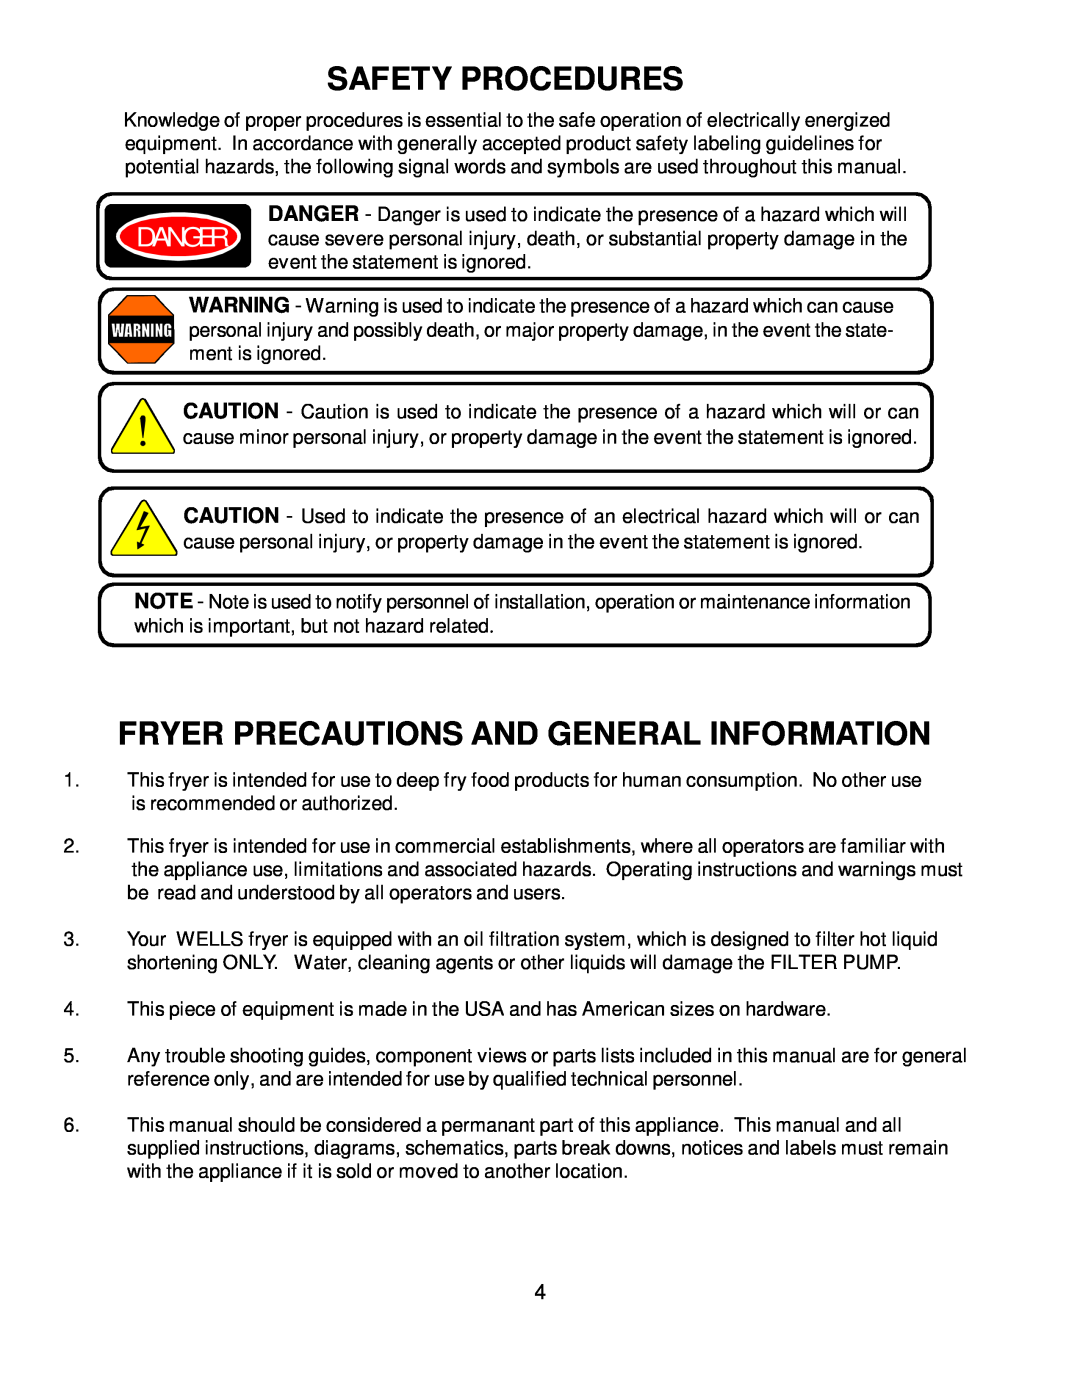 Bloomfield WFPE-30F manual Safety Procedures, Fryer Precautions And General Information 